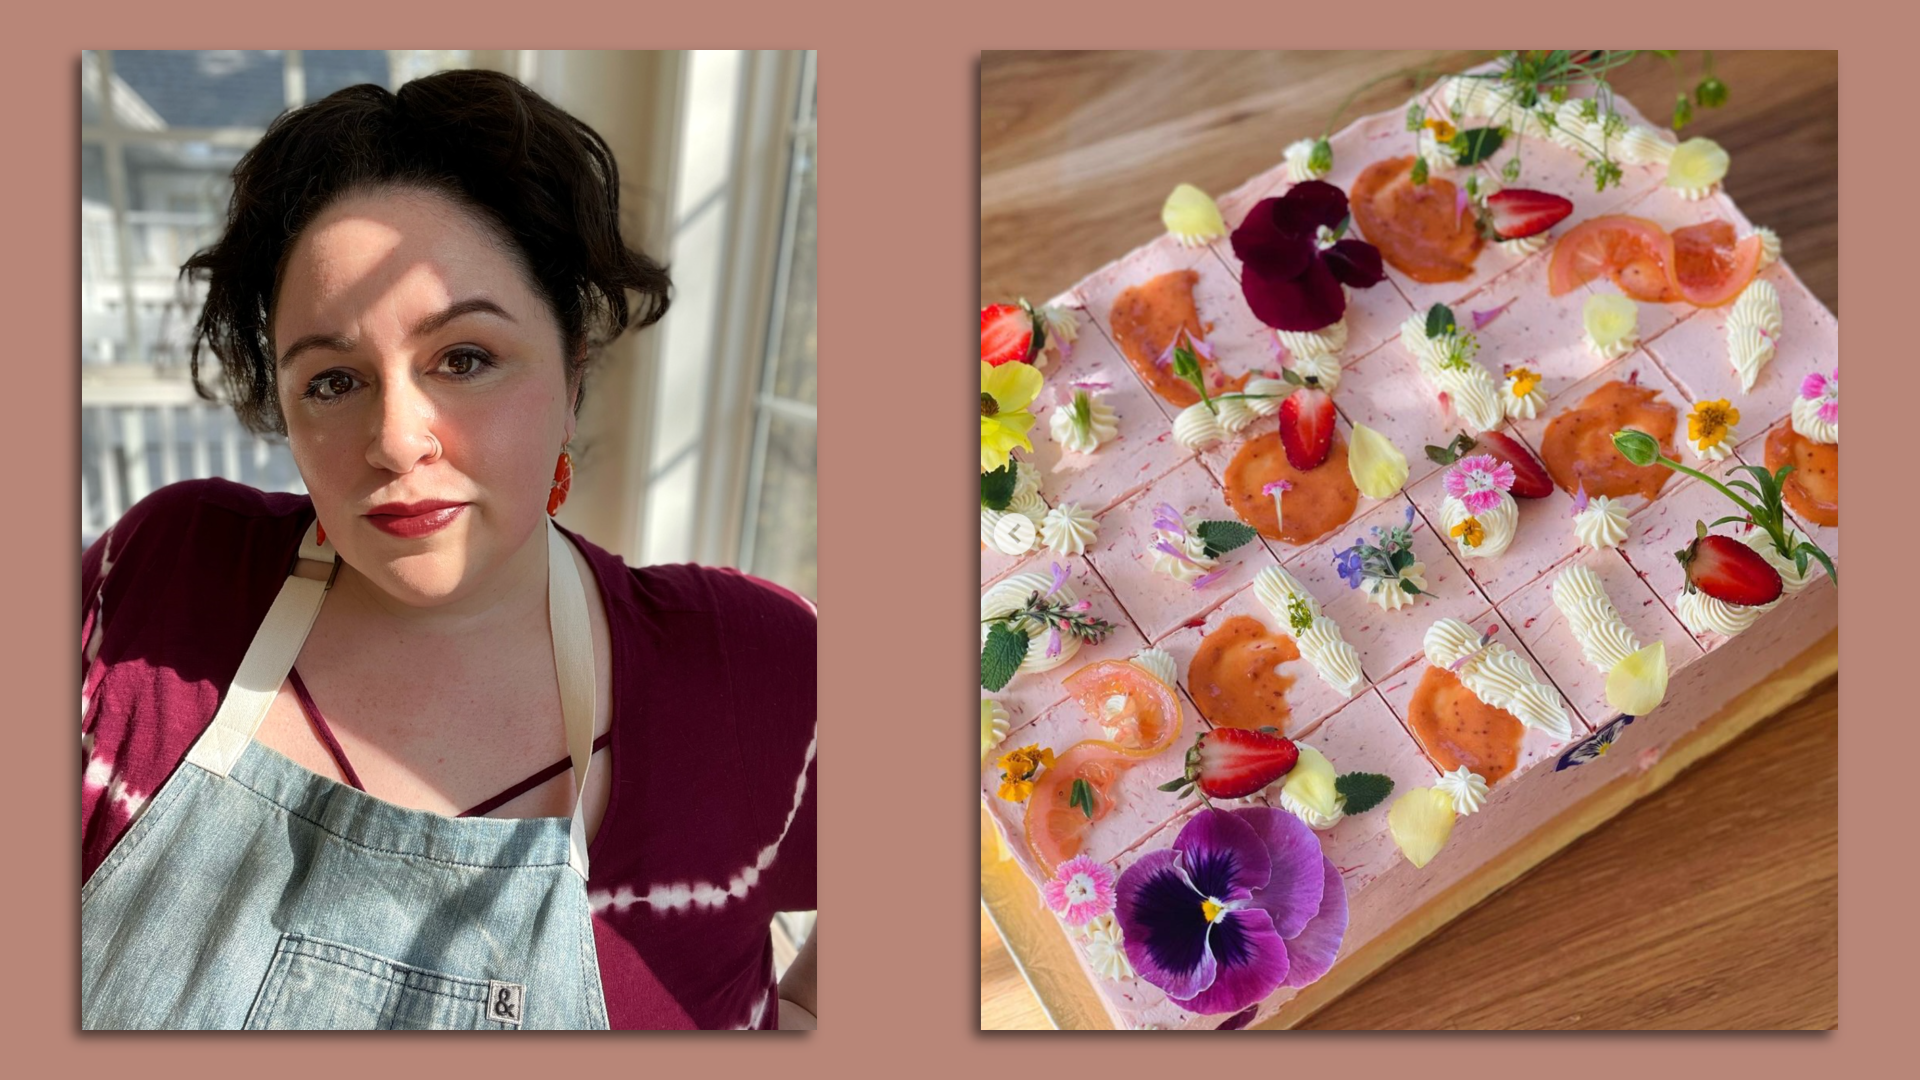 A side by side photo of a woman with dark hair wearing an apron as the sun and shadows cross her face and a colorful pastel and pink sponge cake 